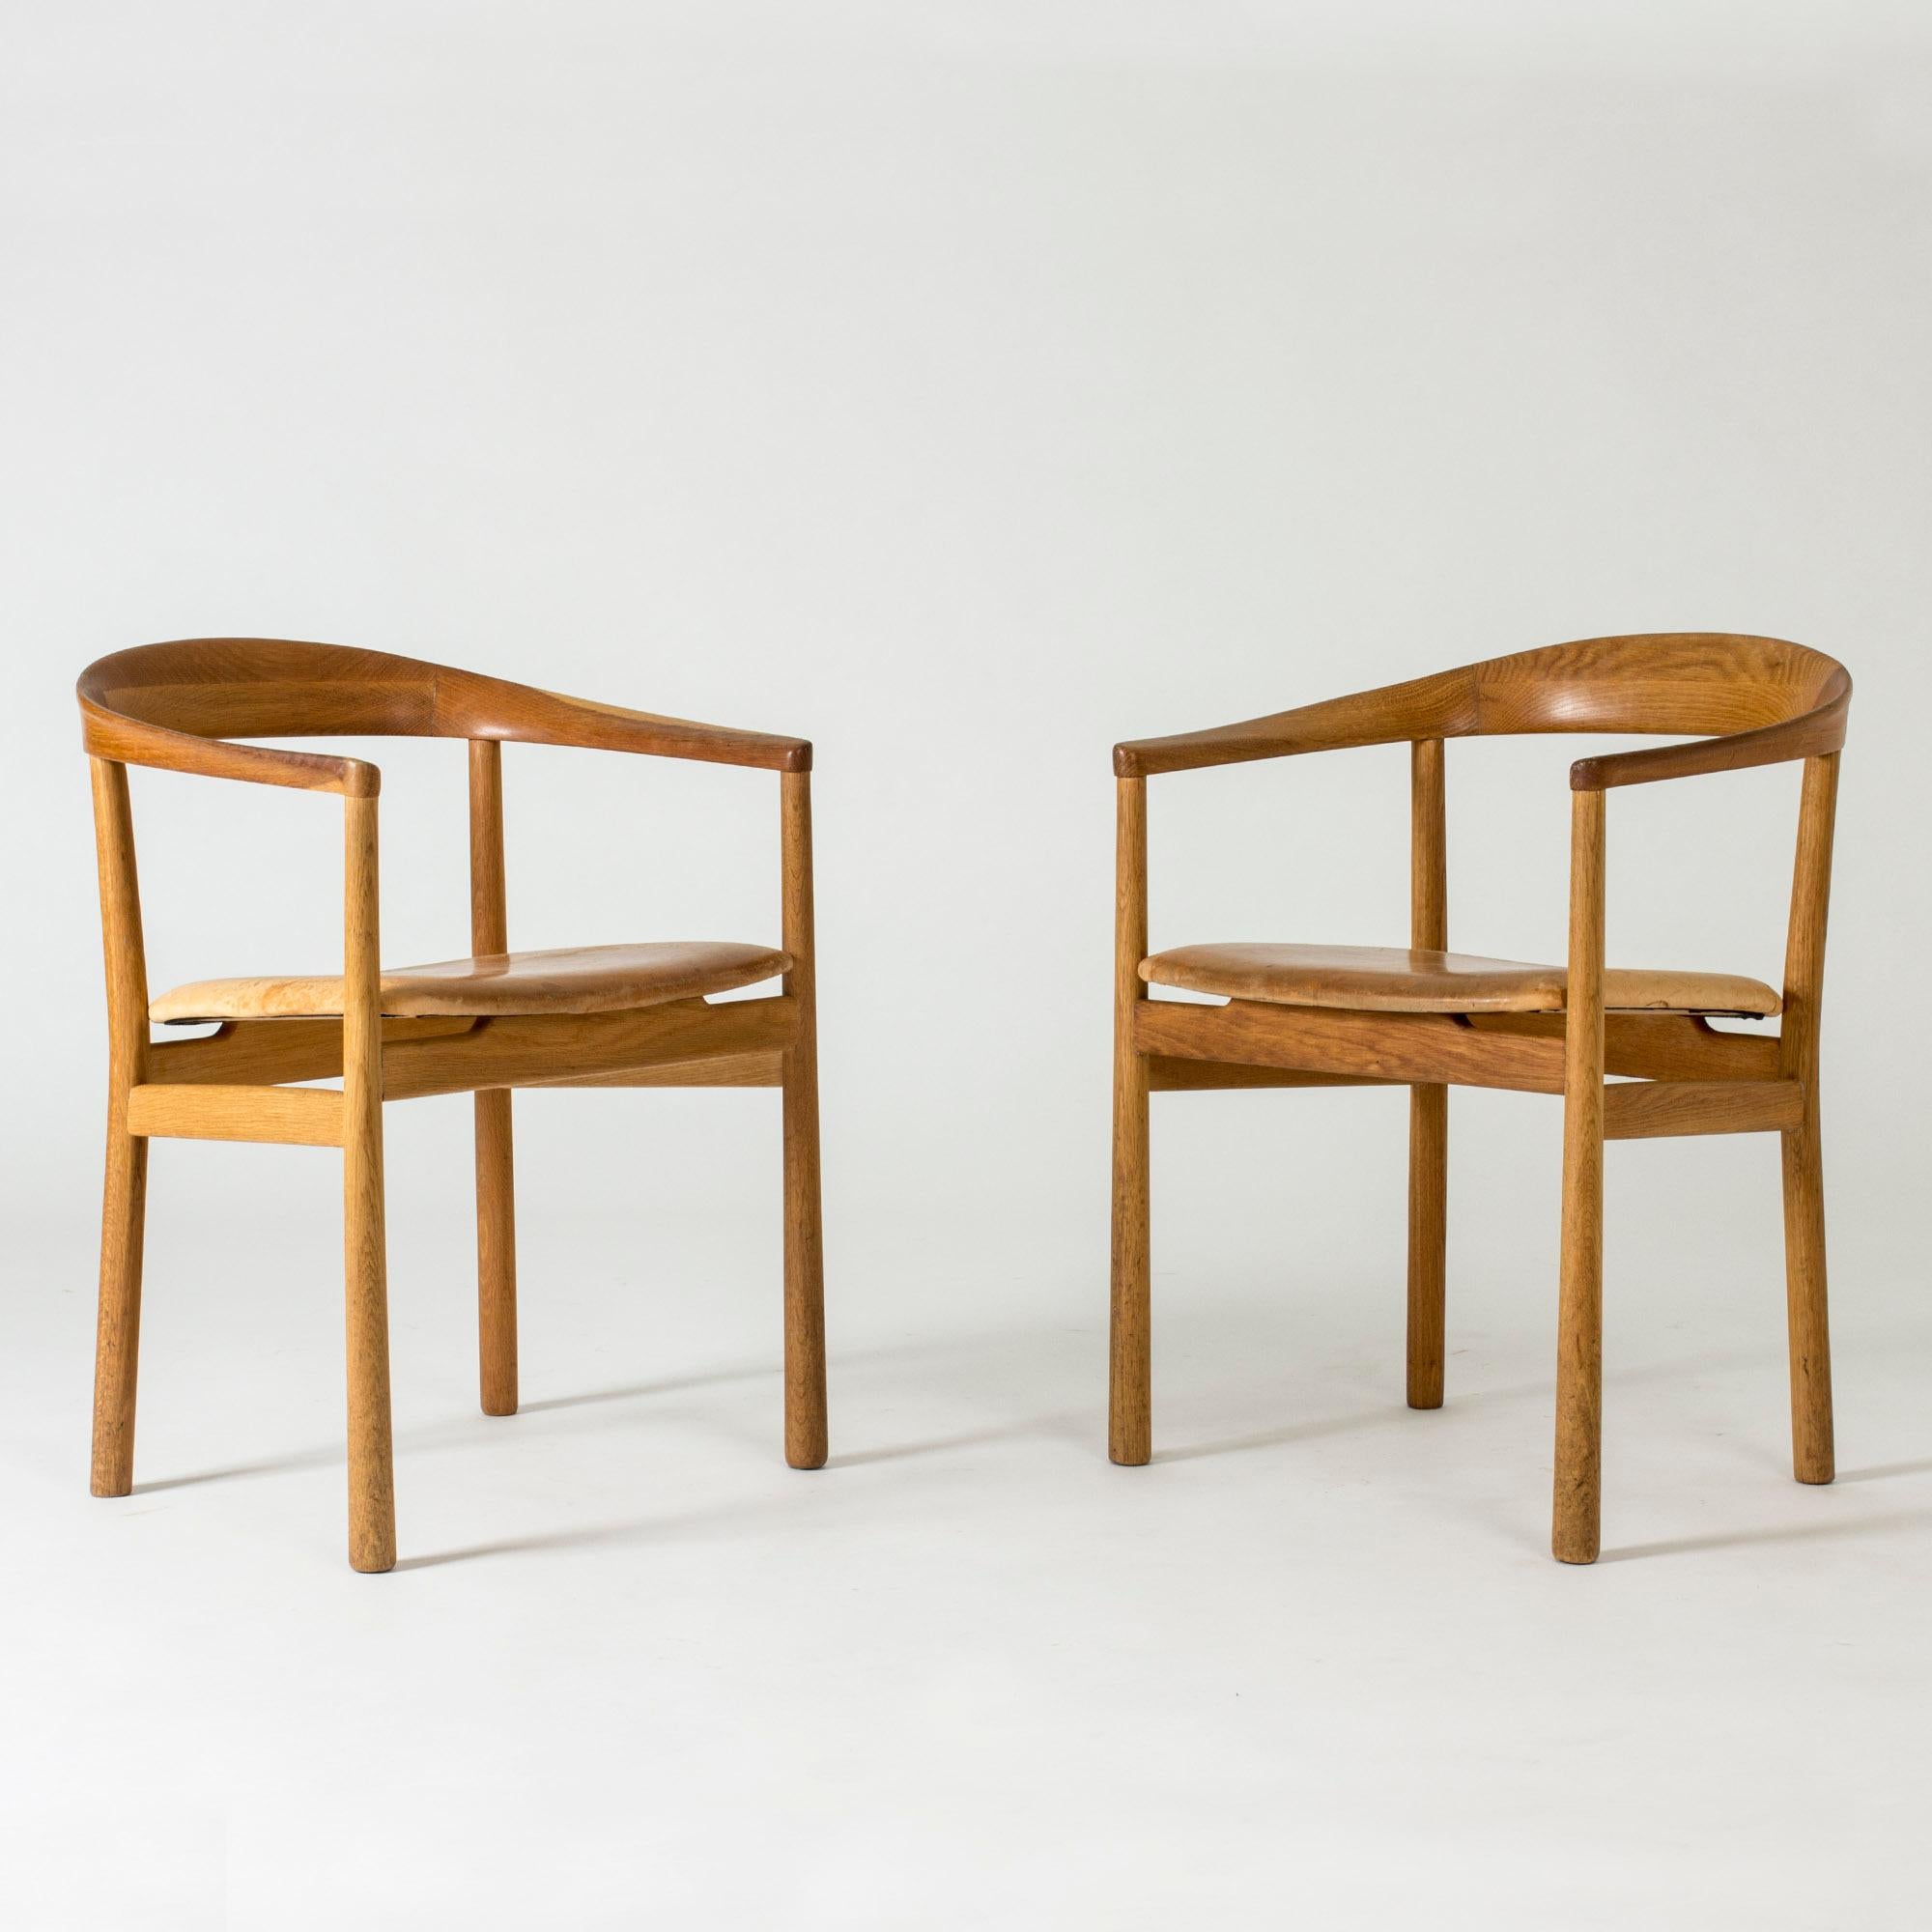 Pair of elegant “Tokyo” armchairs by Carl-Axel Acking, made from oak and upholstered with natural leather, heavily patinated. The “Tokyo” model was created in 1959 for the Swedish embassy in Tokyo.